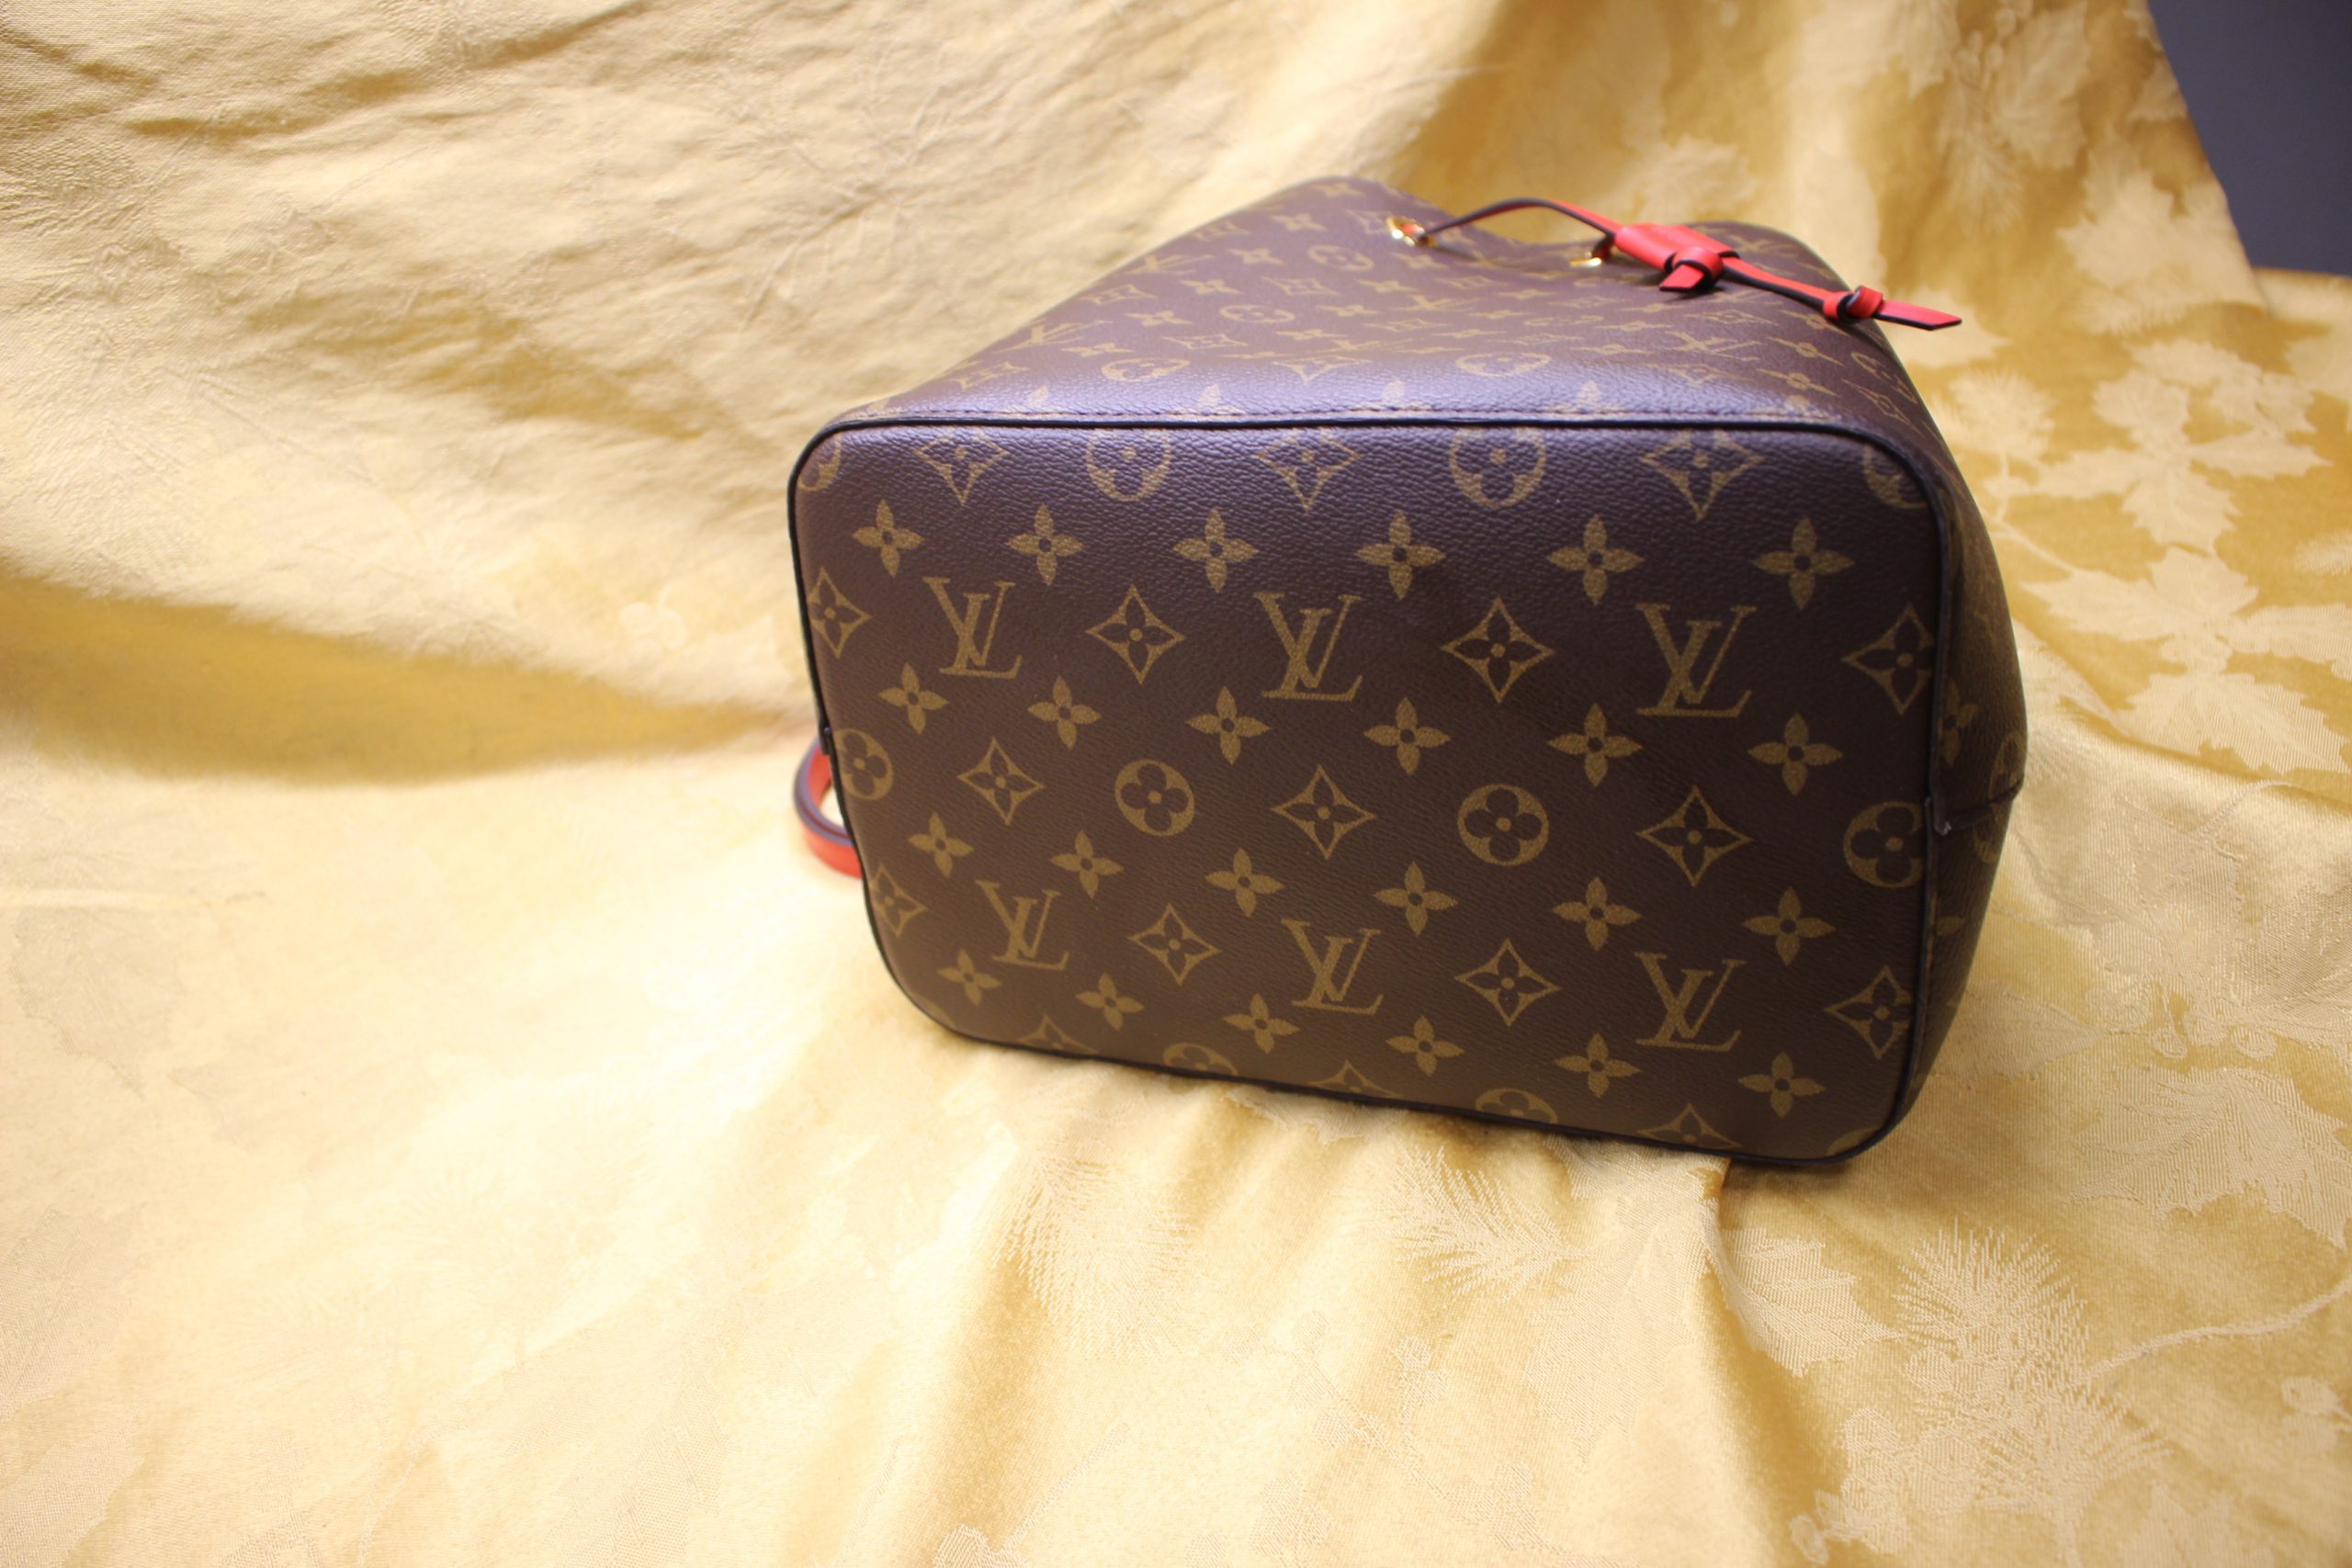 Auth LOUIS VUITTON Neo Bucket Monogram and Red Leather Shoulder Bag Purse  #49019